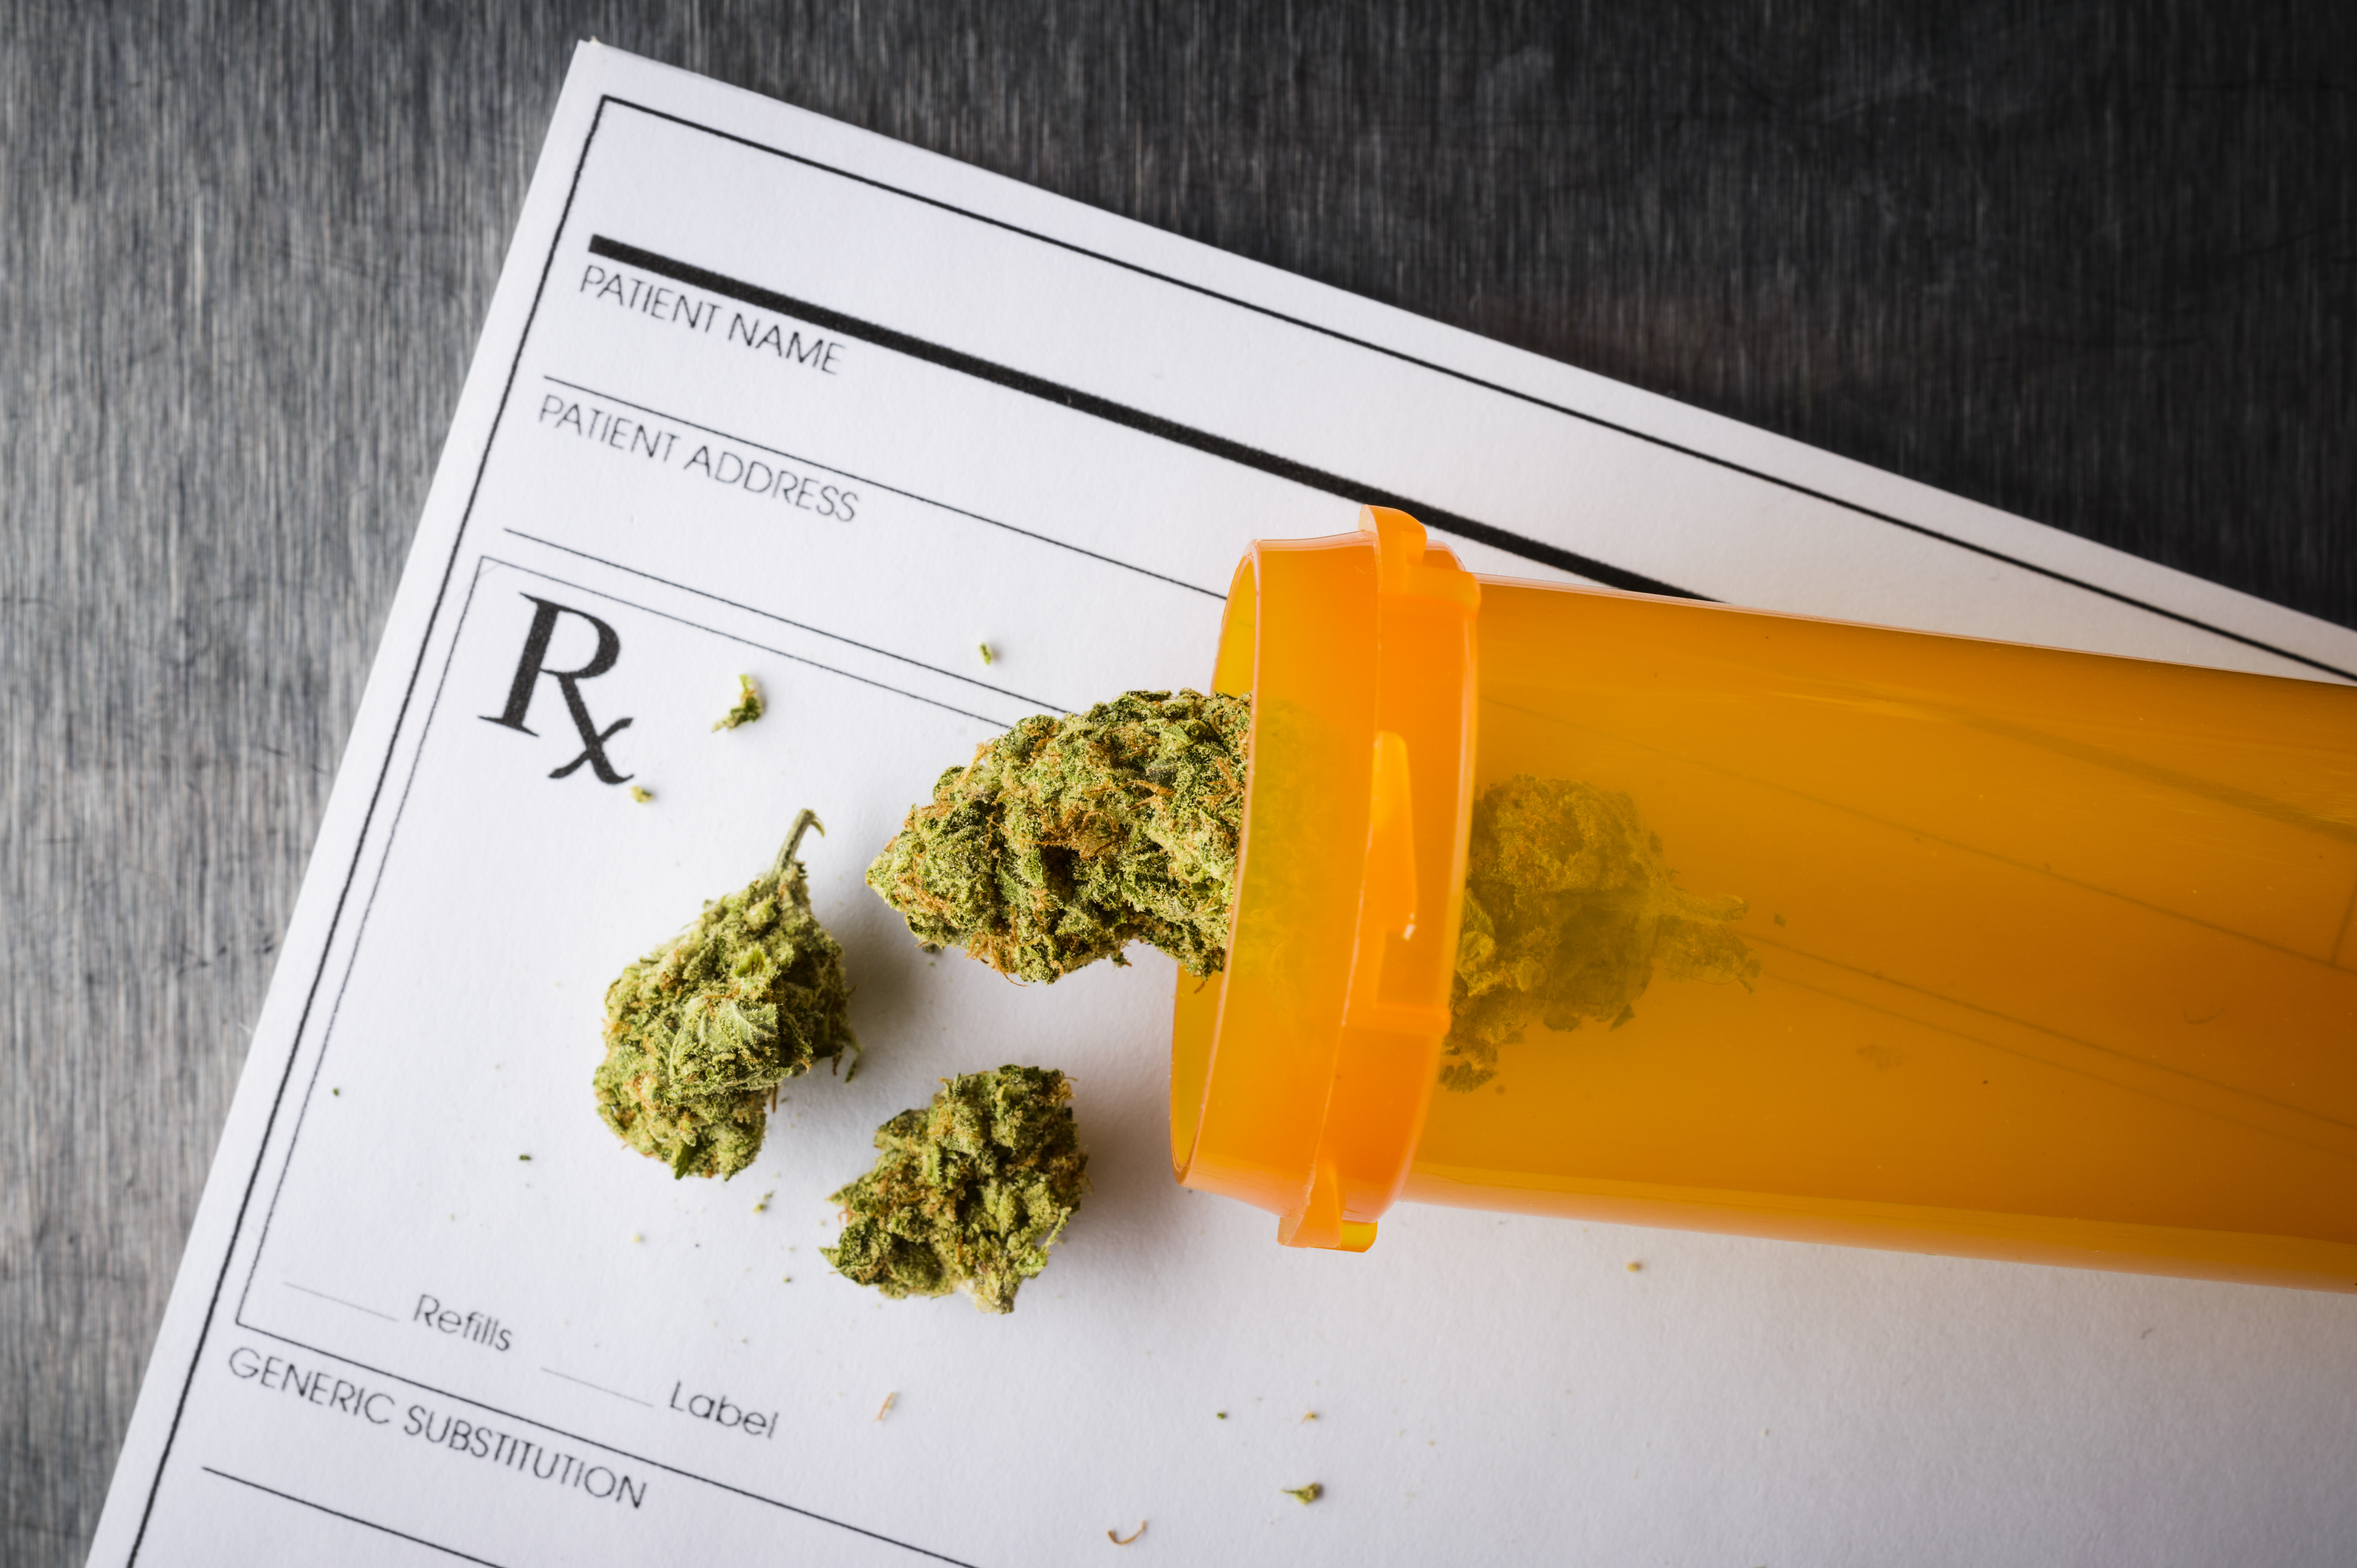 How Will the New Medical Marijuana Law Impact Your Business?